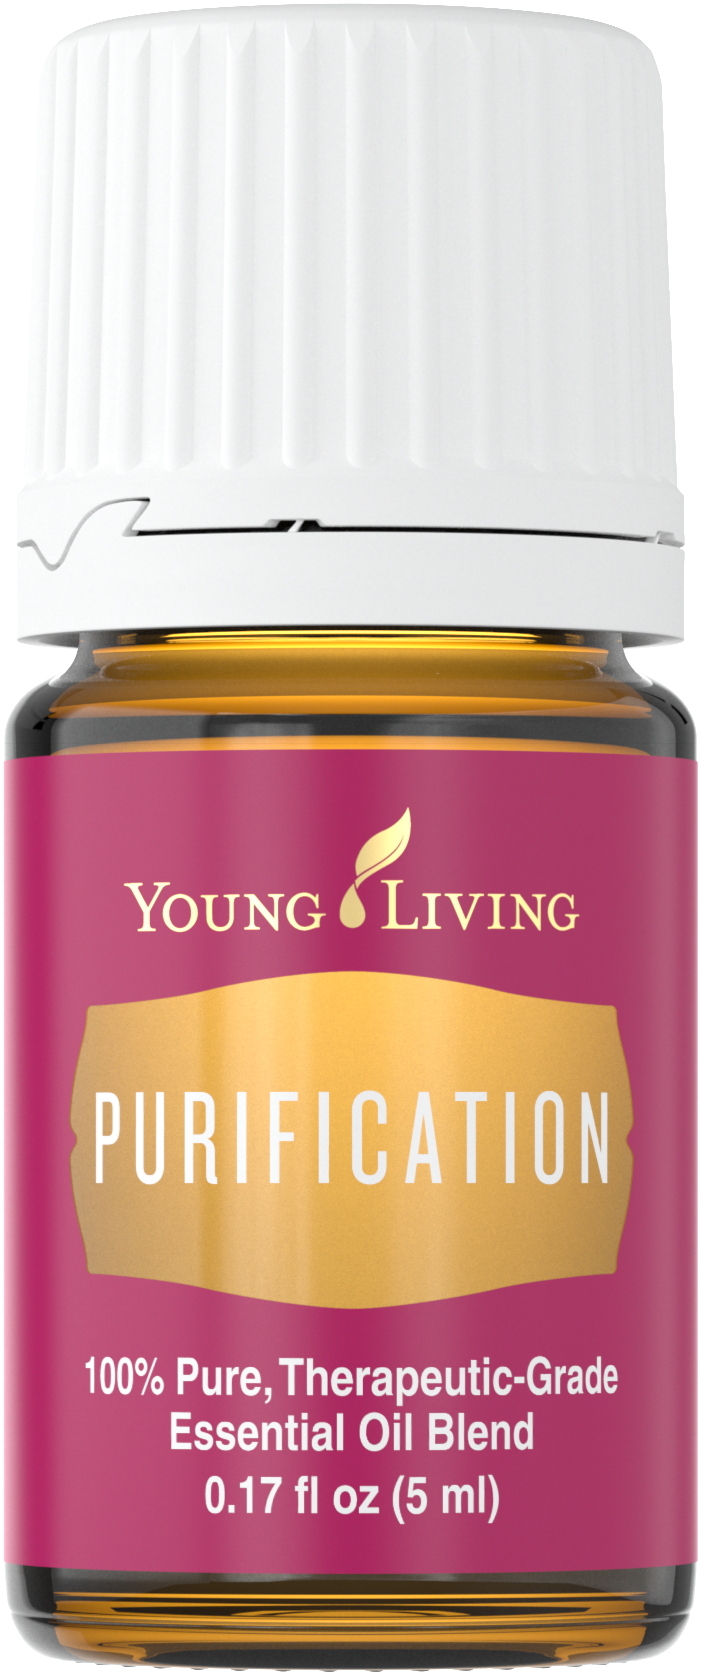 purification essential oil